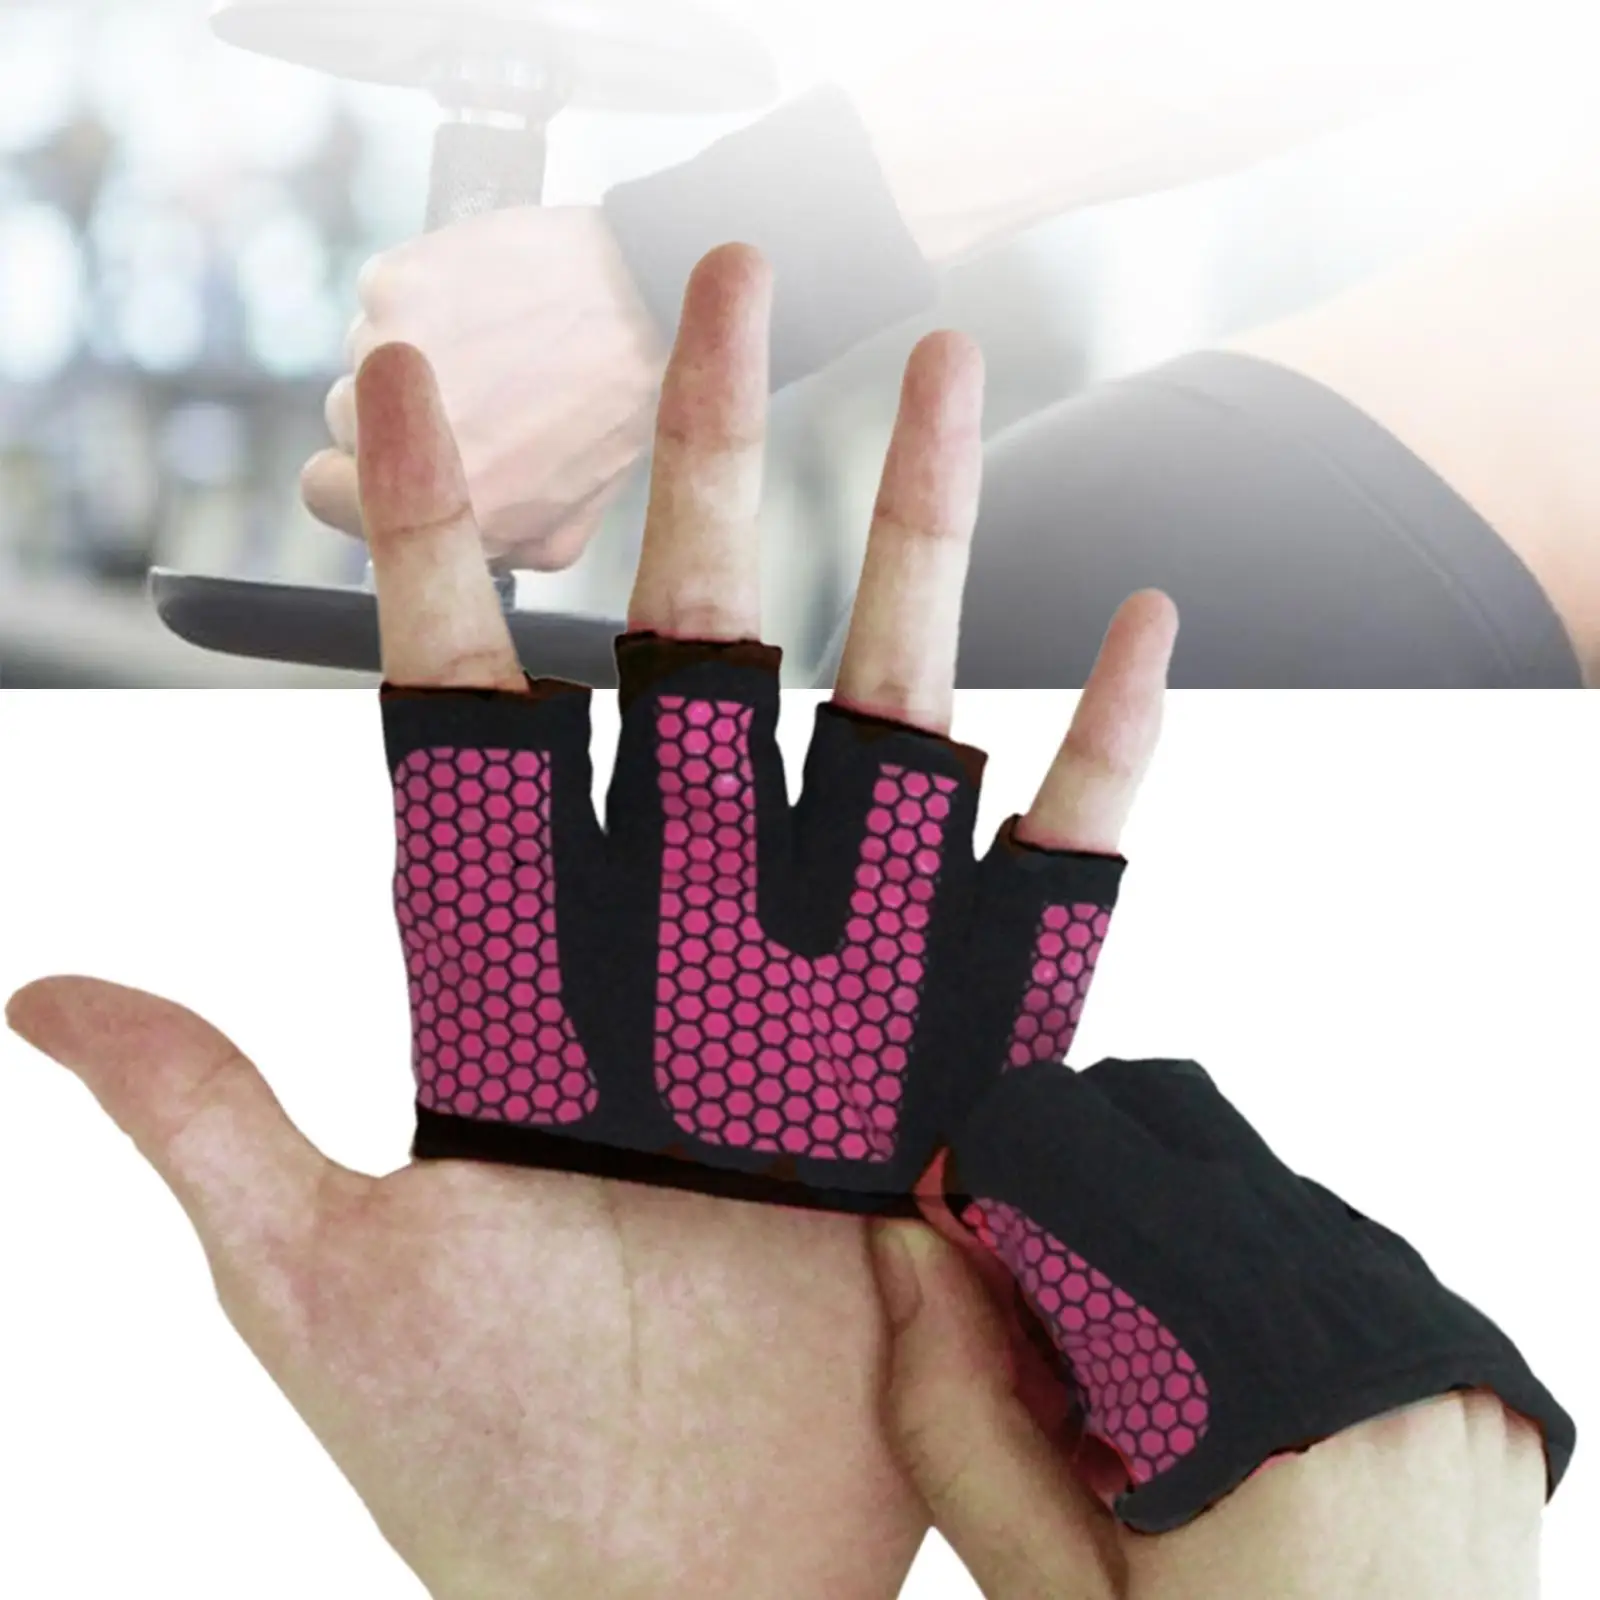 2x Half Finger Workout Gloves Weight Lifting Gloves Fitness Gloves Comfortable Non Slip for Exercise Men Barbell Powerlifting